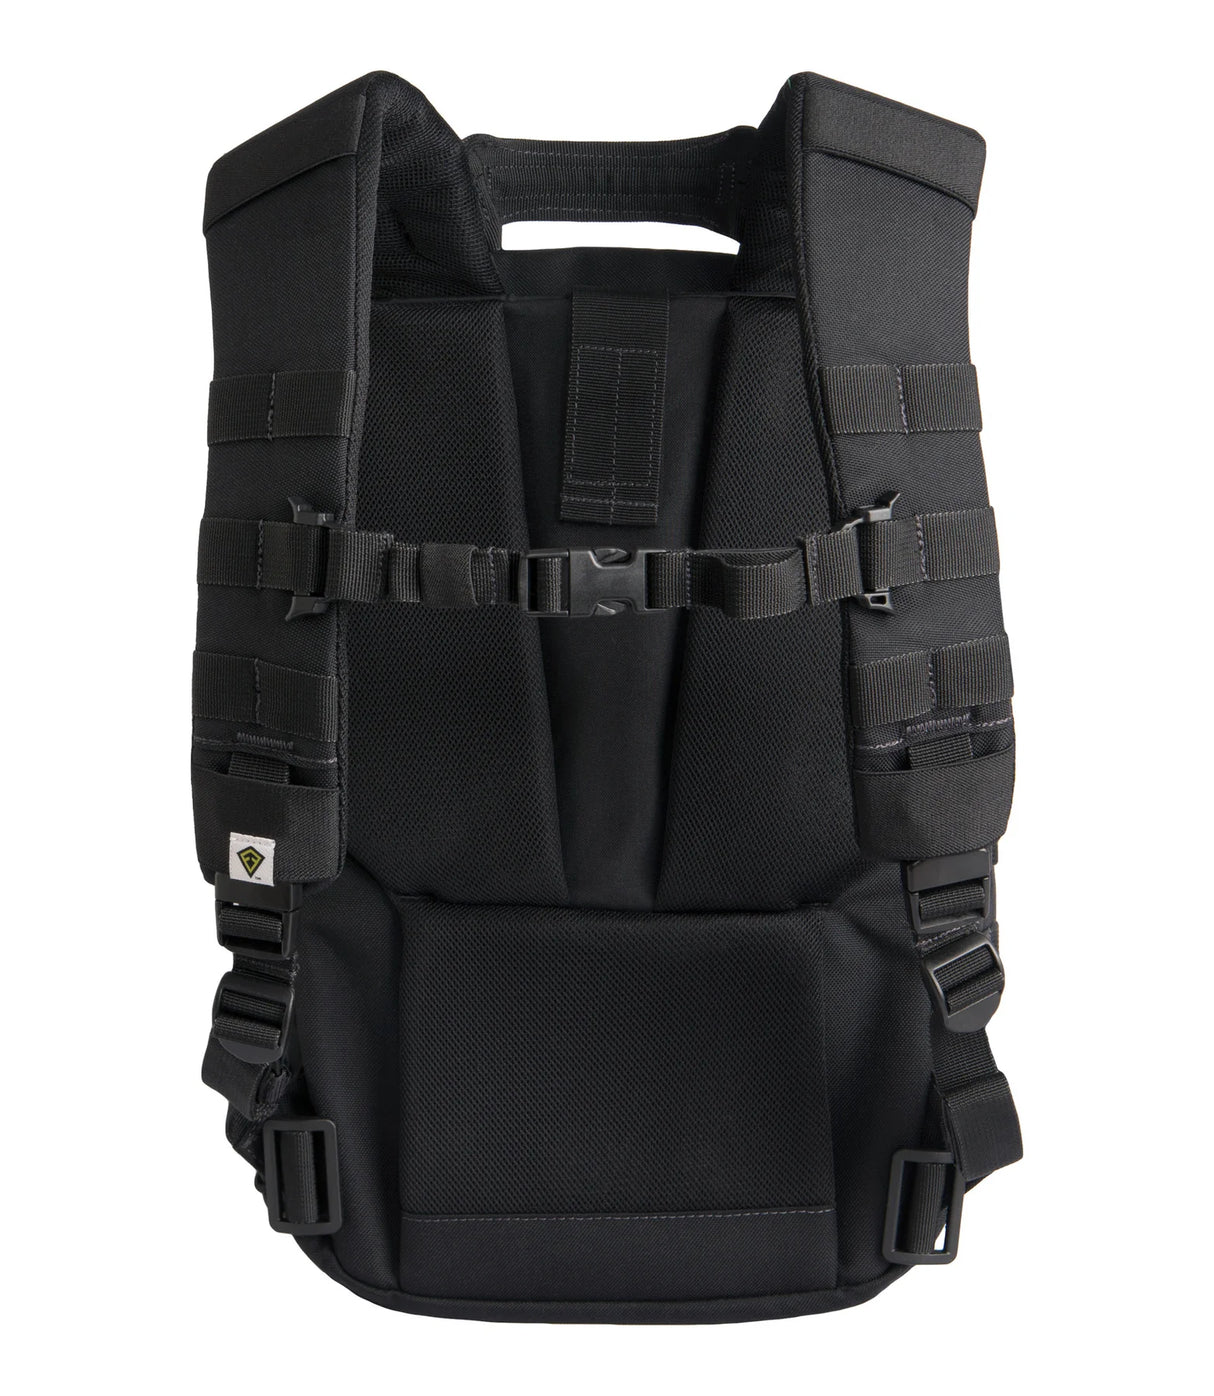 First Tactical Specialist Backpack 0.5D